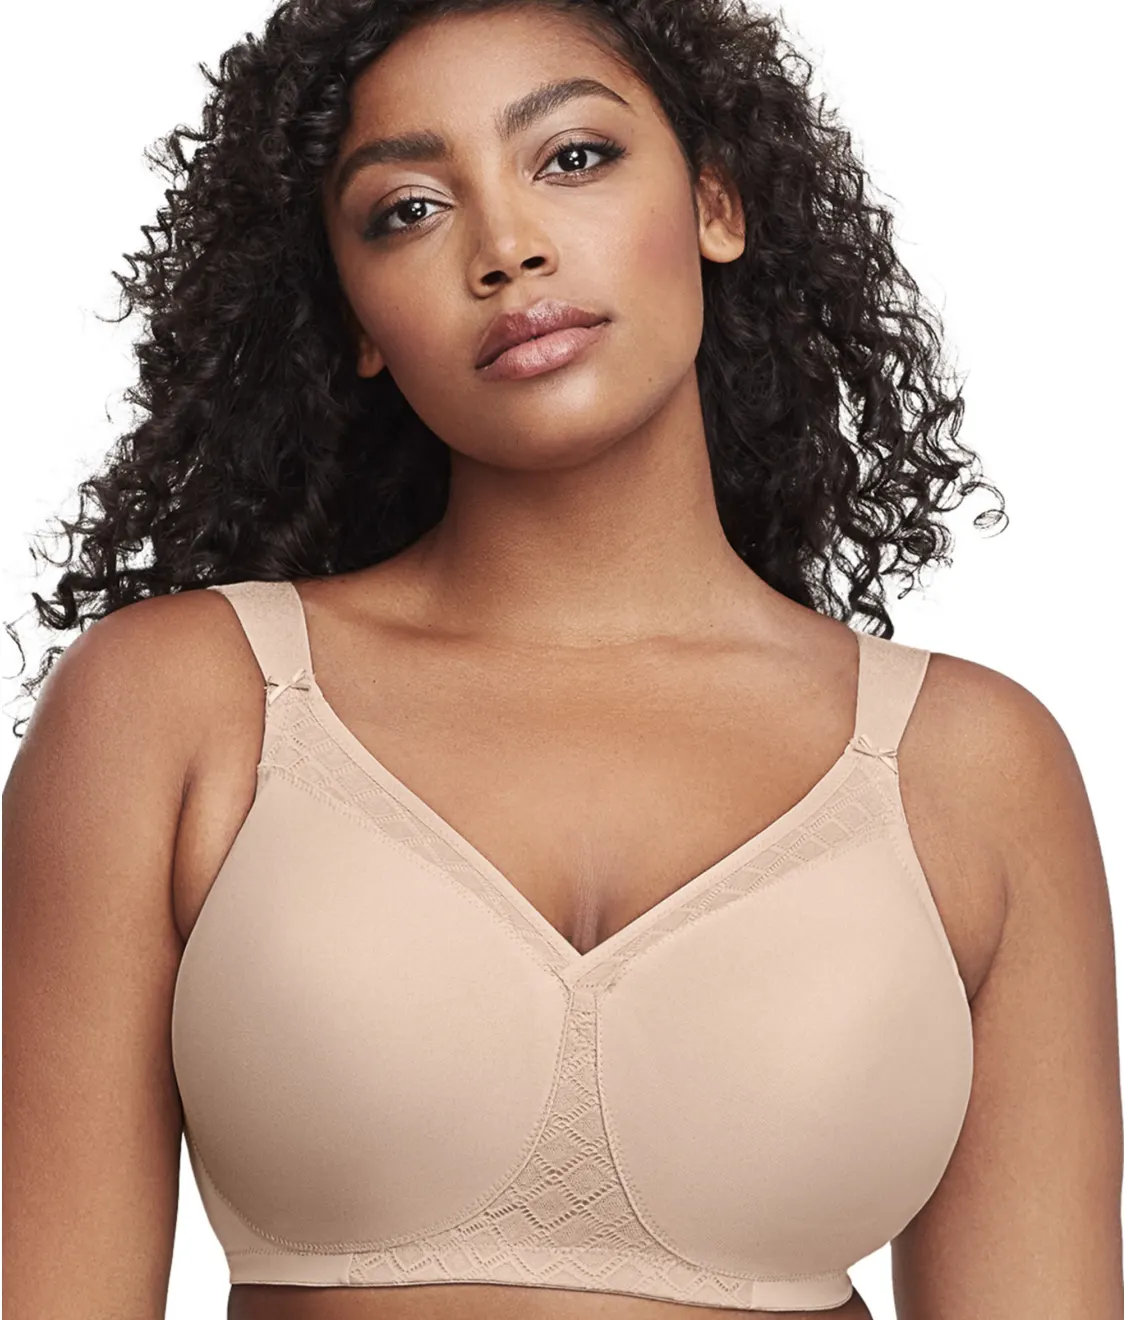 Does Negative's Wireless Bra Live Up To The Hype? - The Mom Edit